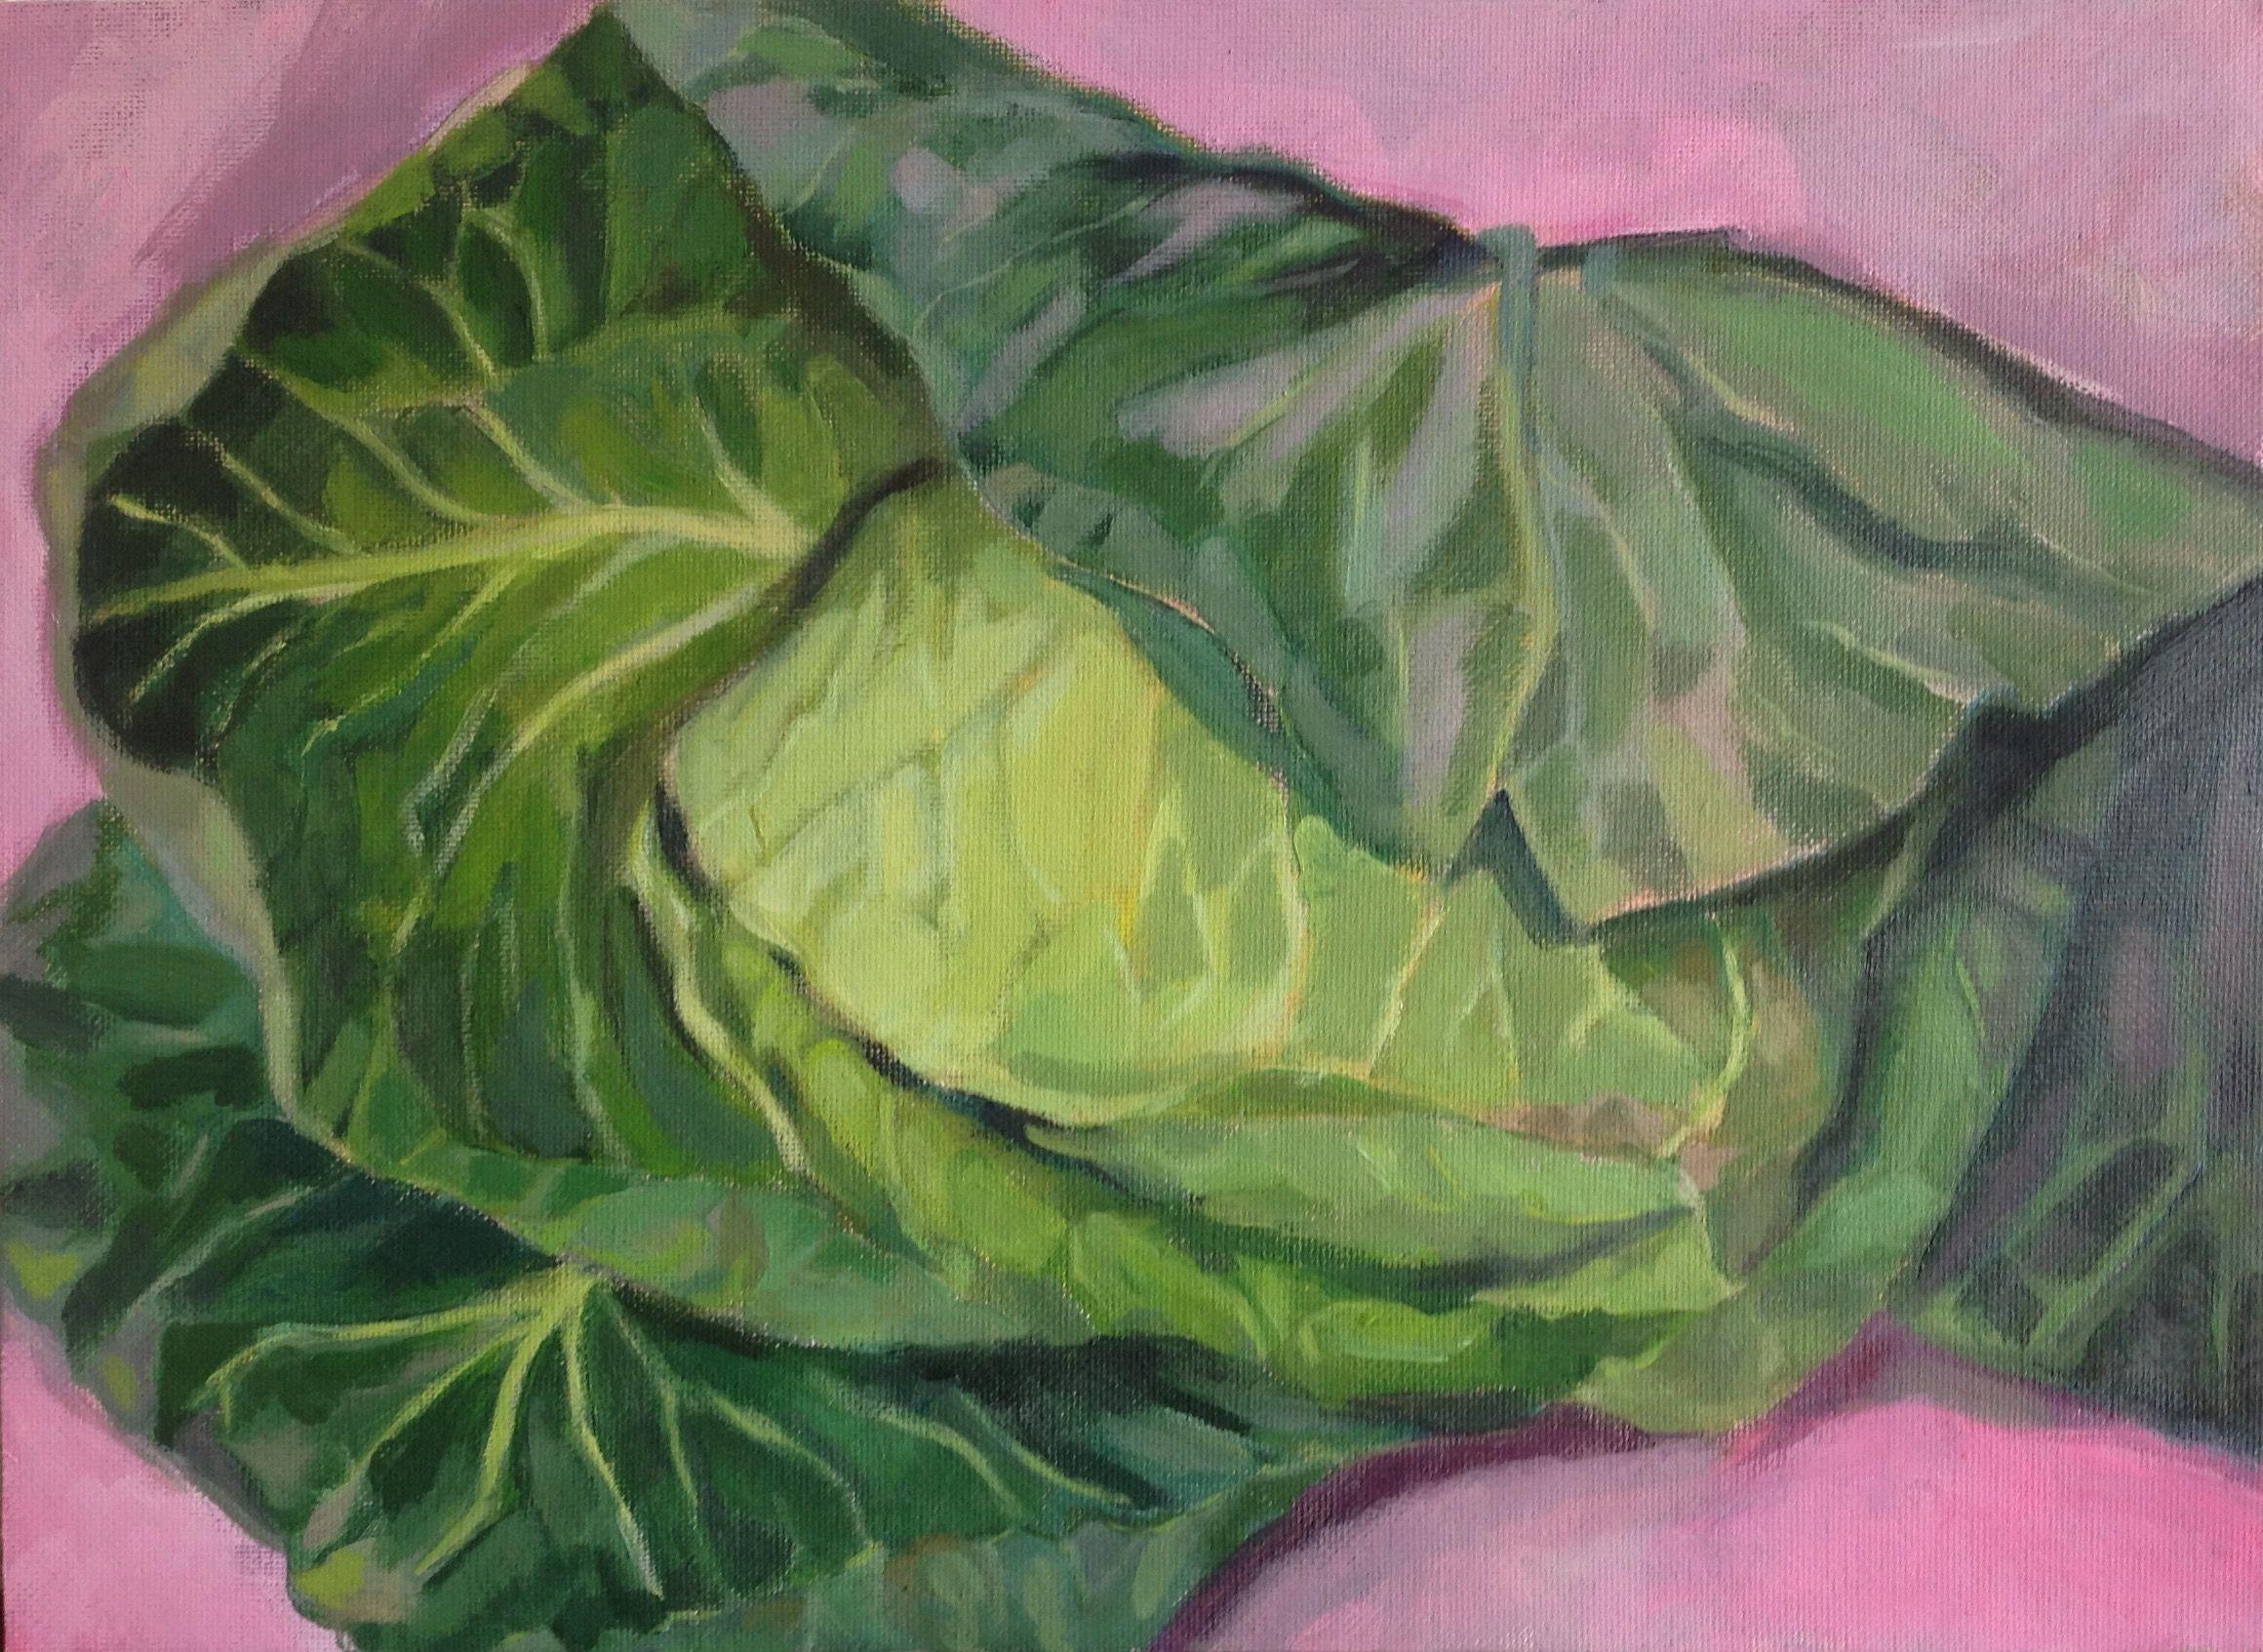 Acrylic on canvas. Every winter I end up making a painting of cabbages.  I love the different greens and the veiny leaves. :: Painting :: Contemporary :: This piece comes with an official certificate of authenticity signed by the artist :: Ready to